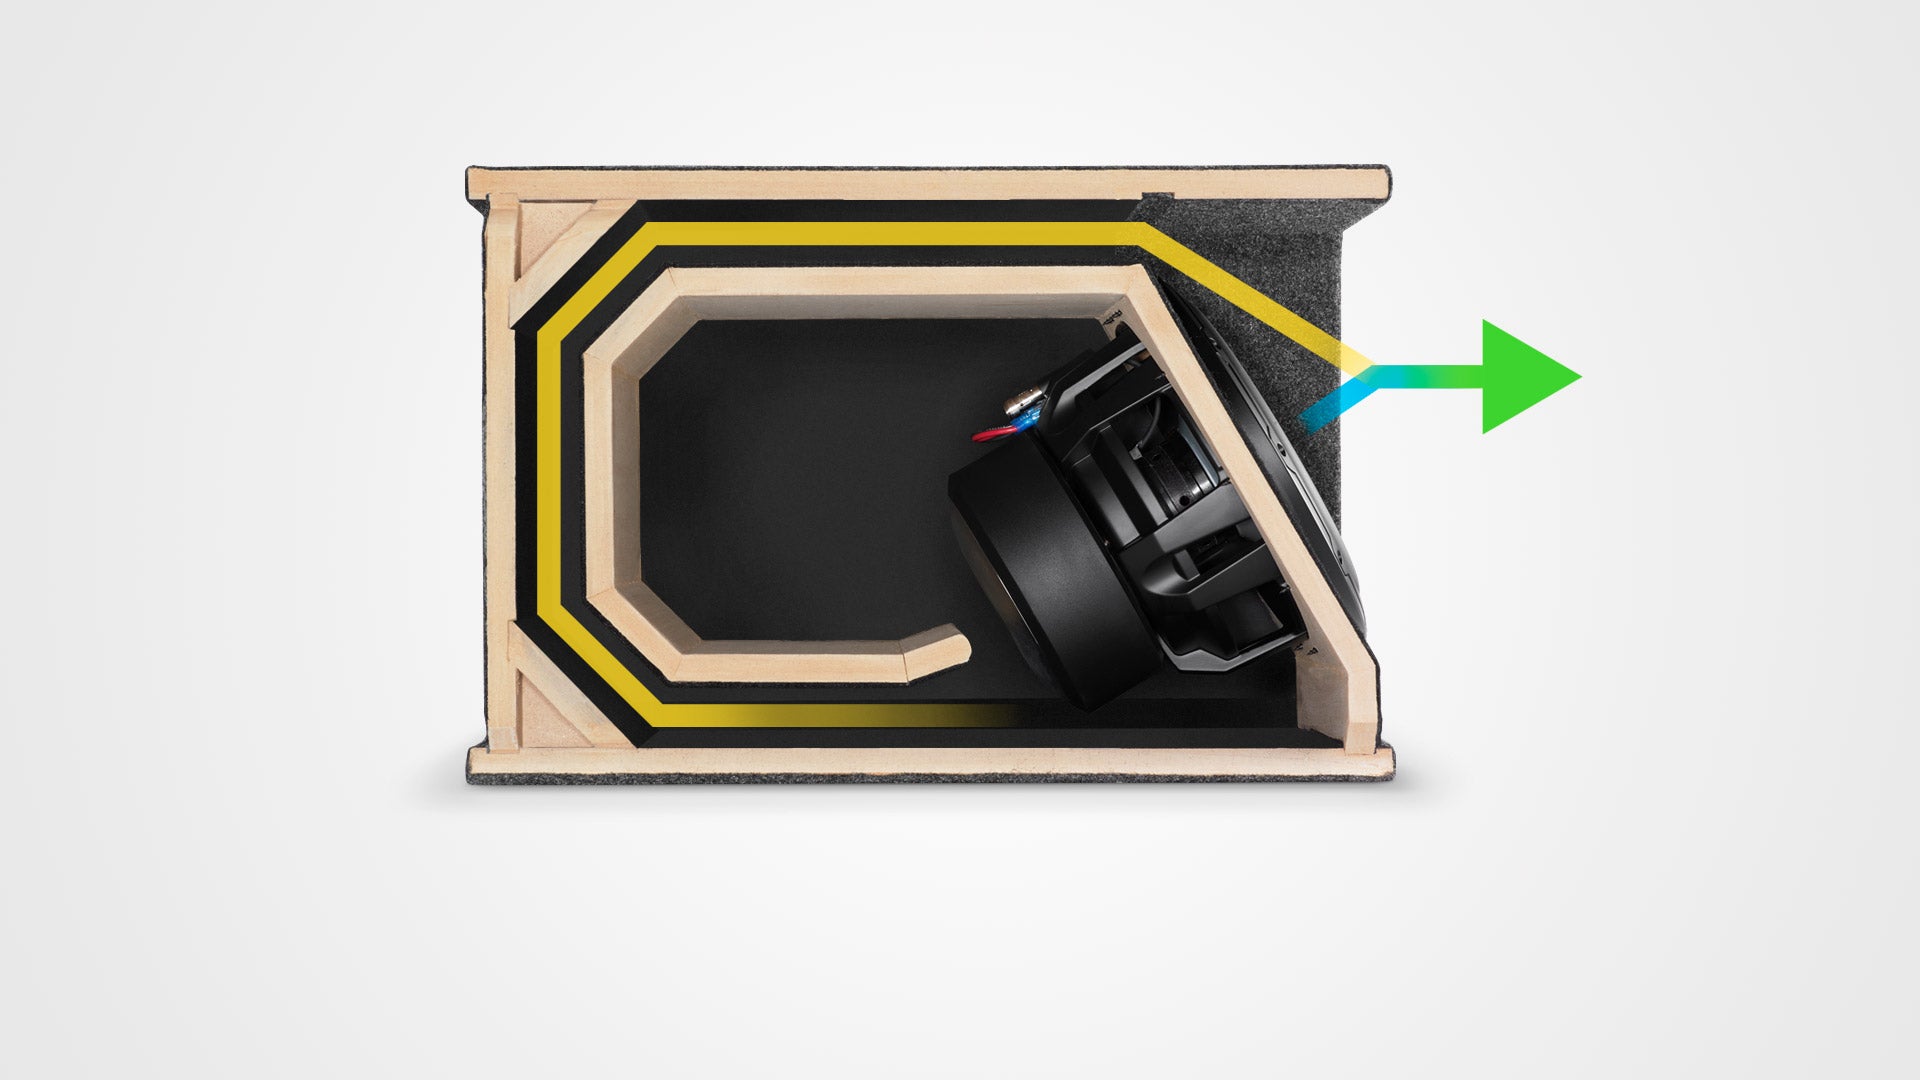 A diagram view of the slot port design of a H.O.Wedge enclosed car subwoofer unit.